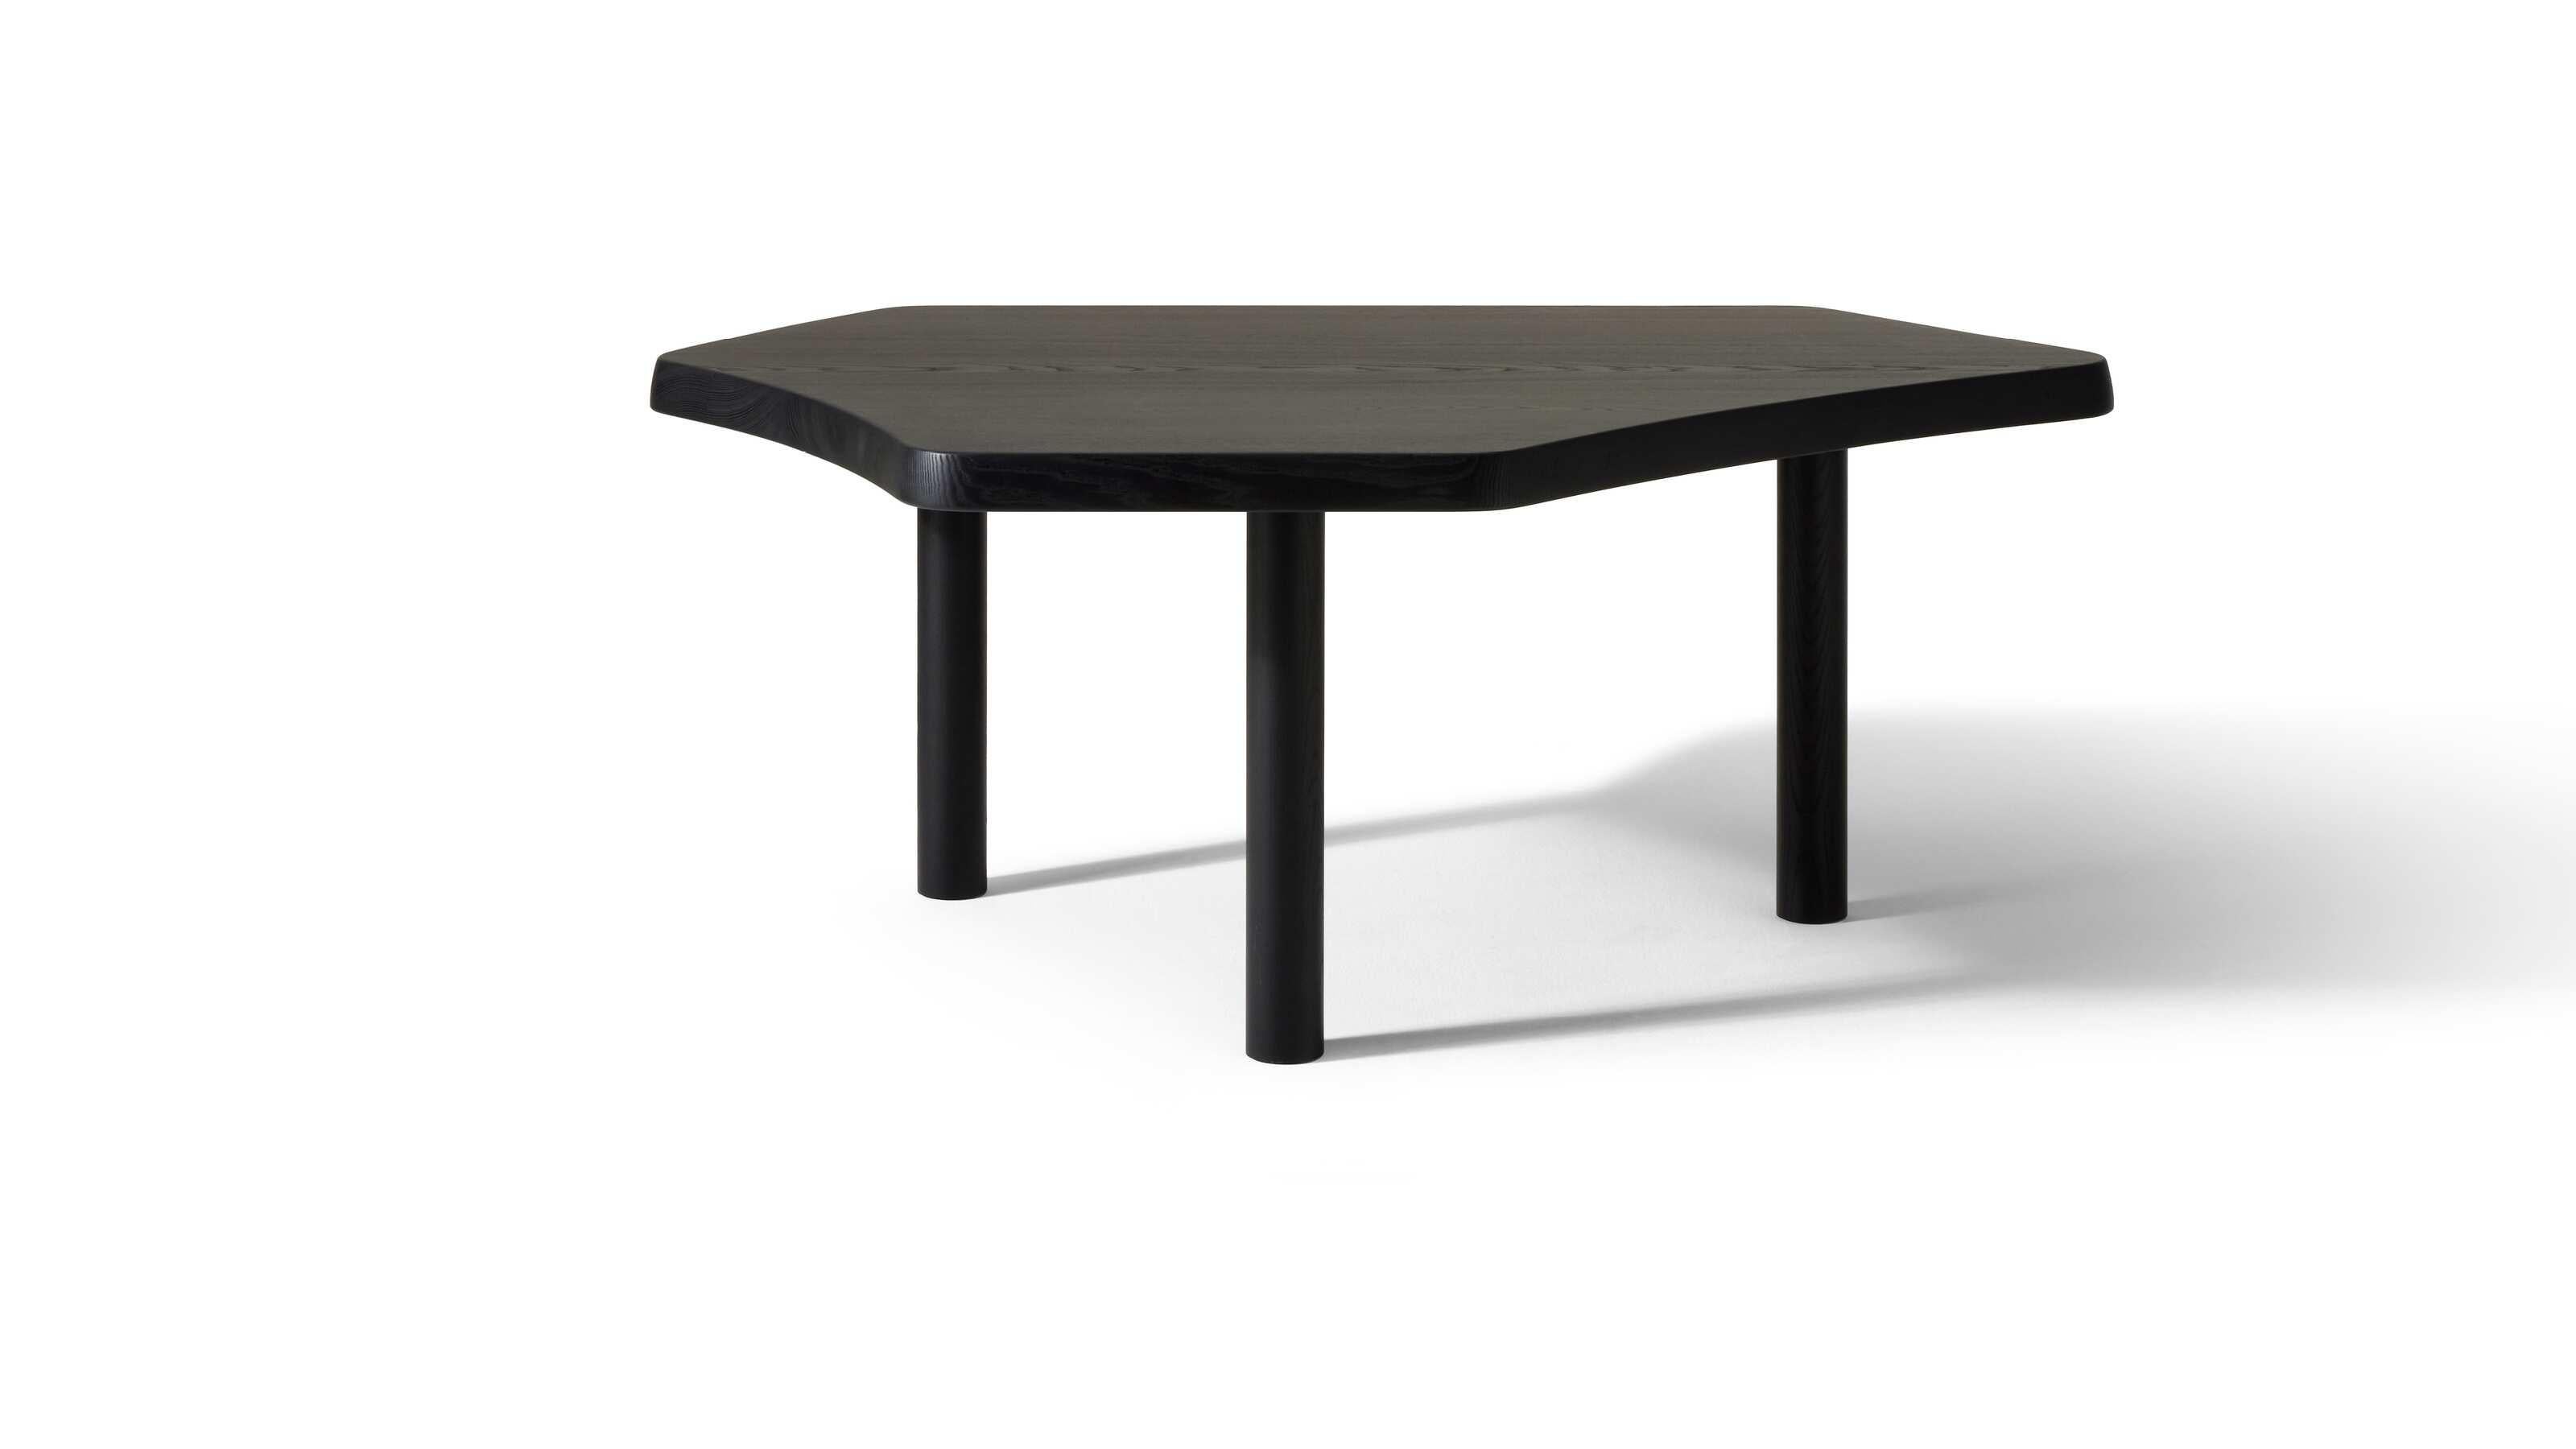 Charlotte Perriand Montparnasse Black Lacquered Wood Free Form Table

Manufactured by Cassina 

REVOLUTION IN FREE-FORM

A six-sided table with an asymmetrical top that, in 1938, opened an innovative chapter in the history of design.

Designed by